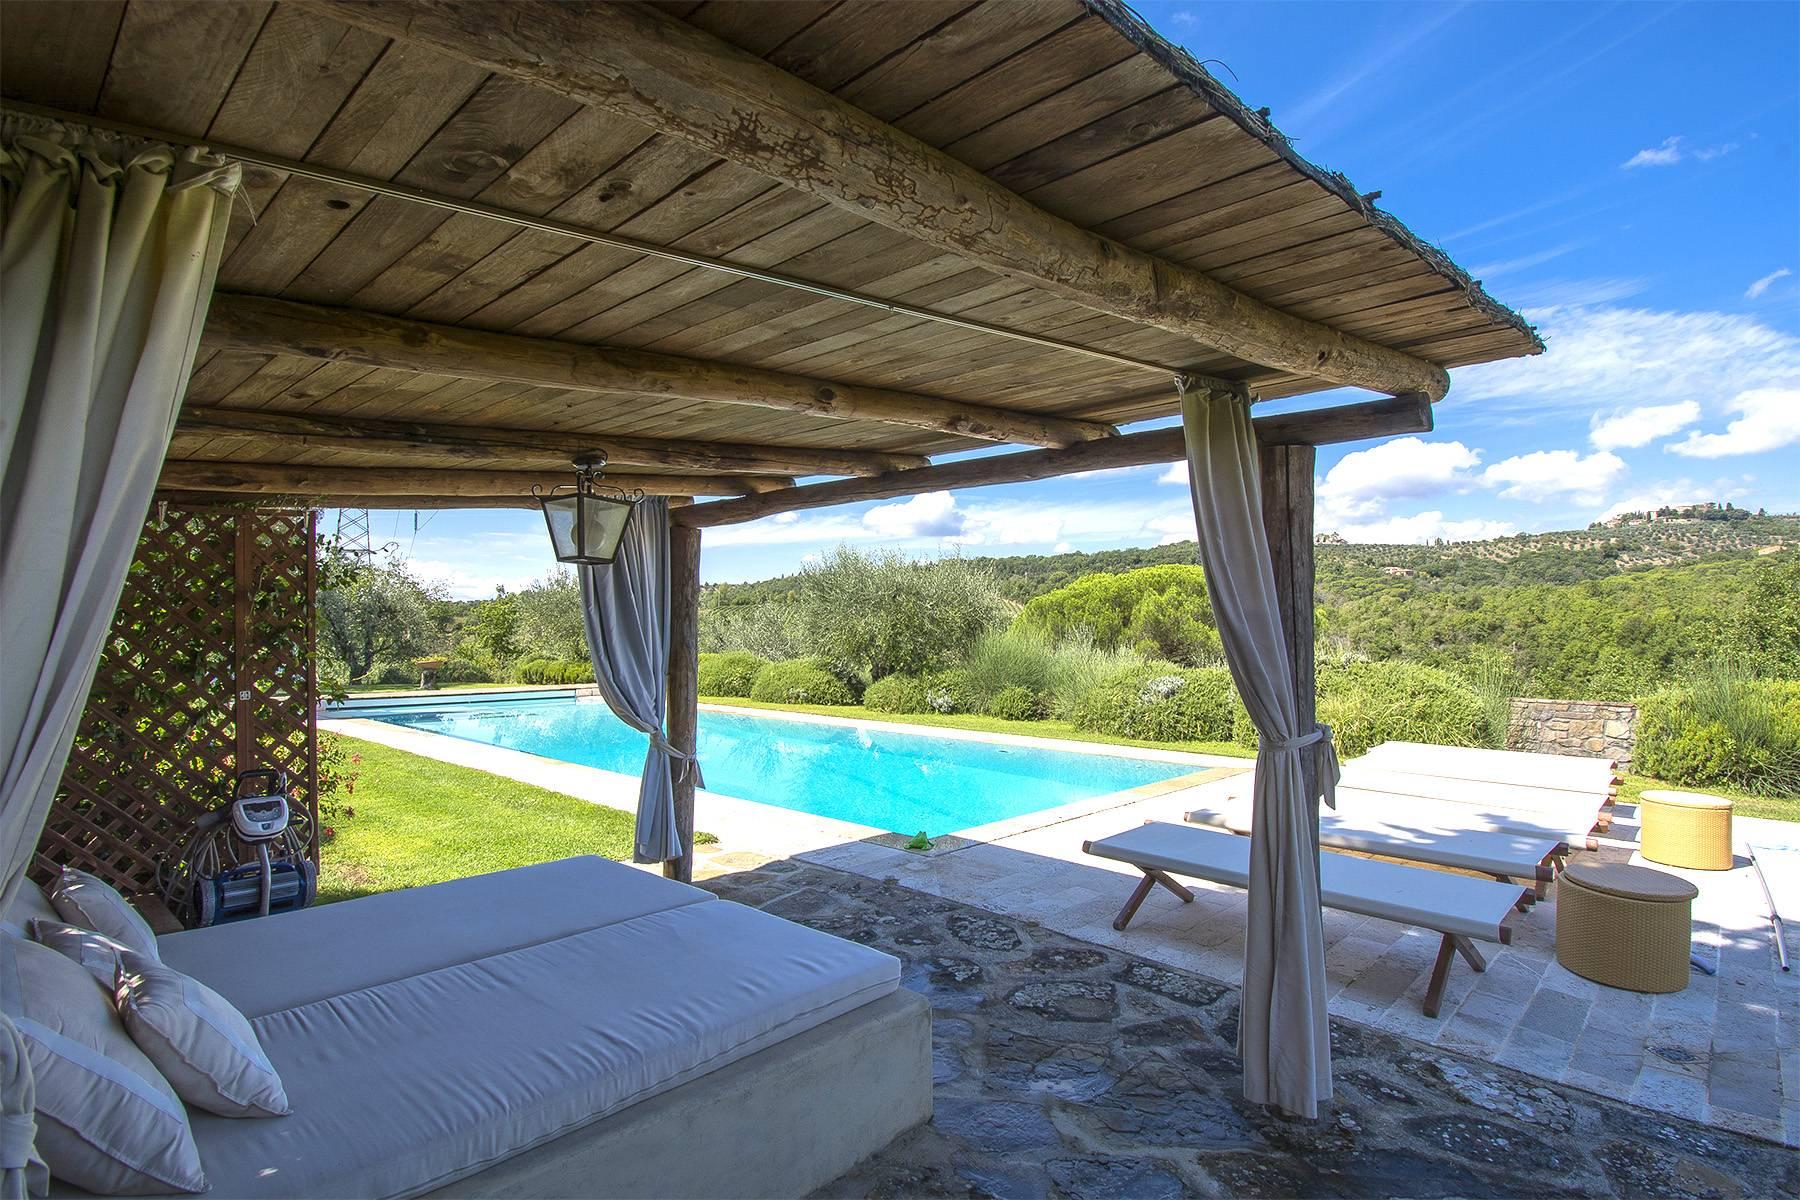 House in the Tuscan Hills for Sale - 26